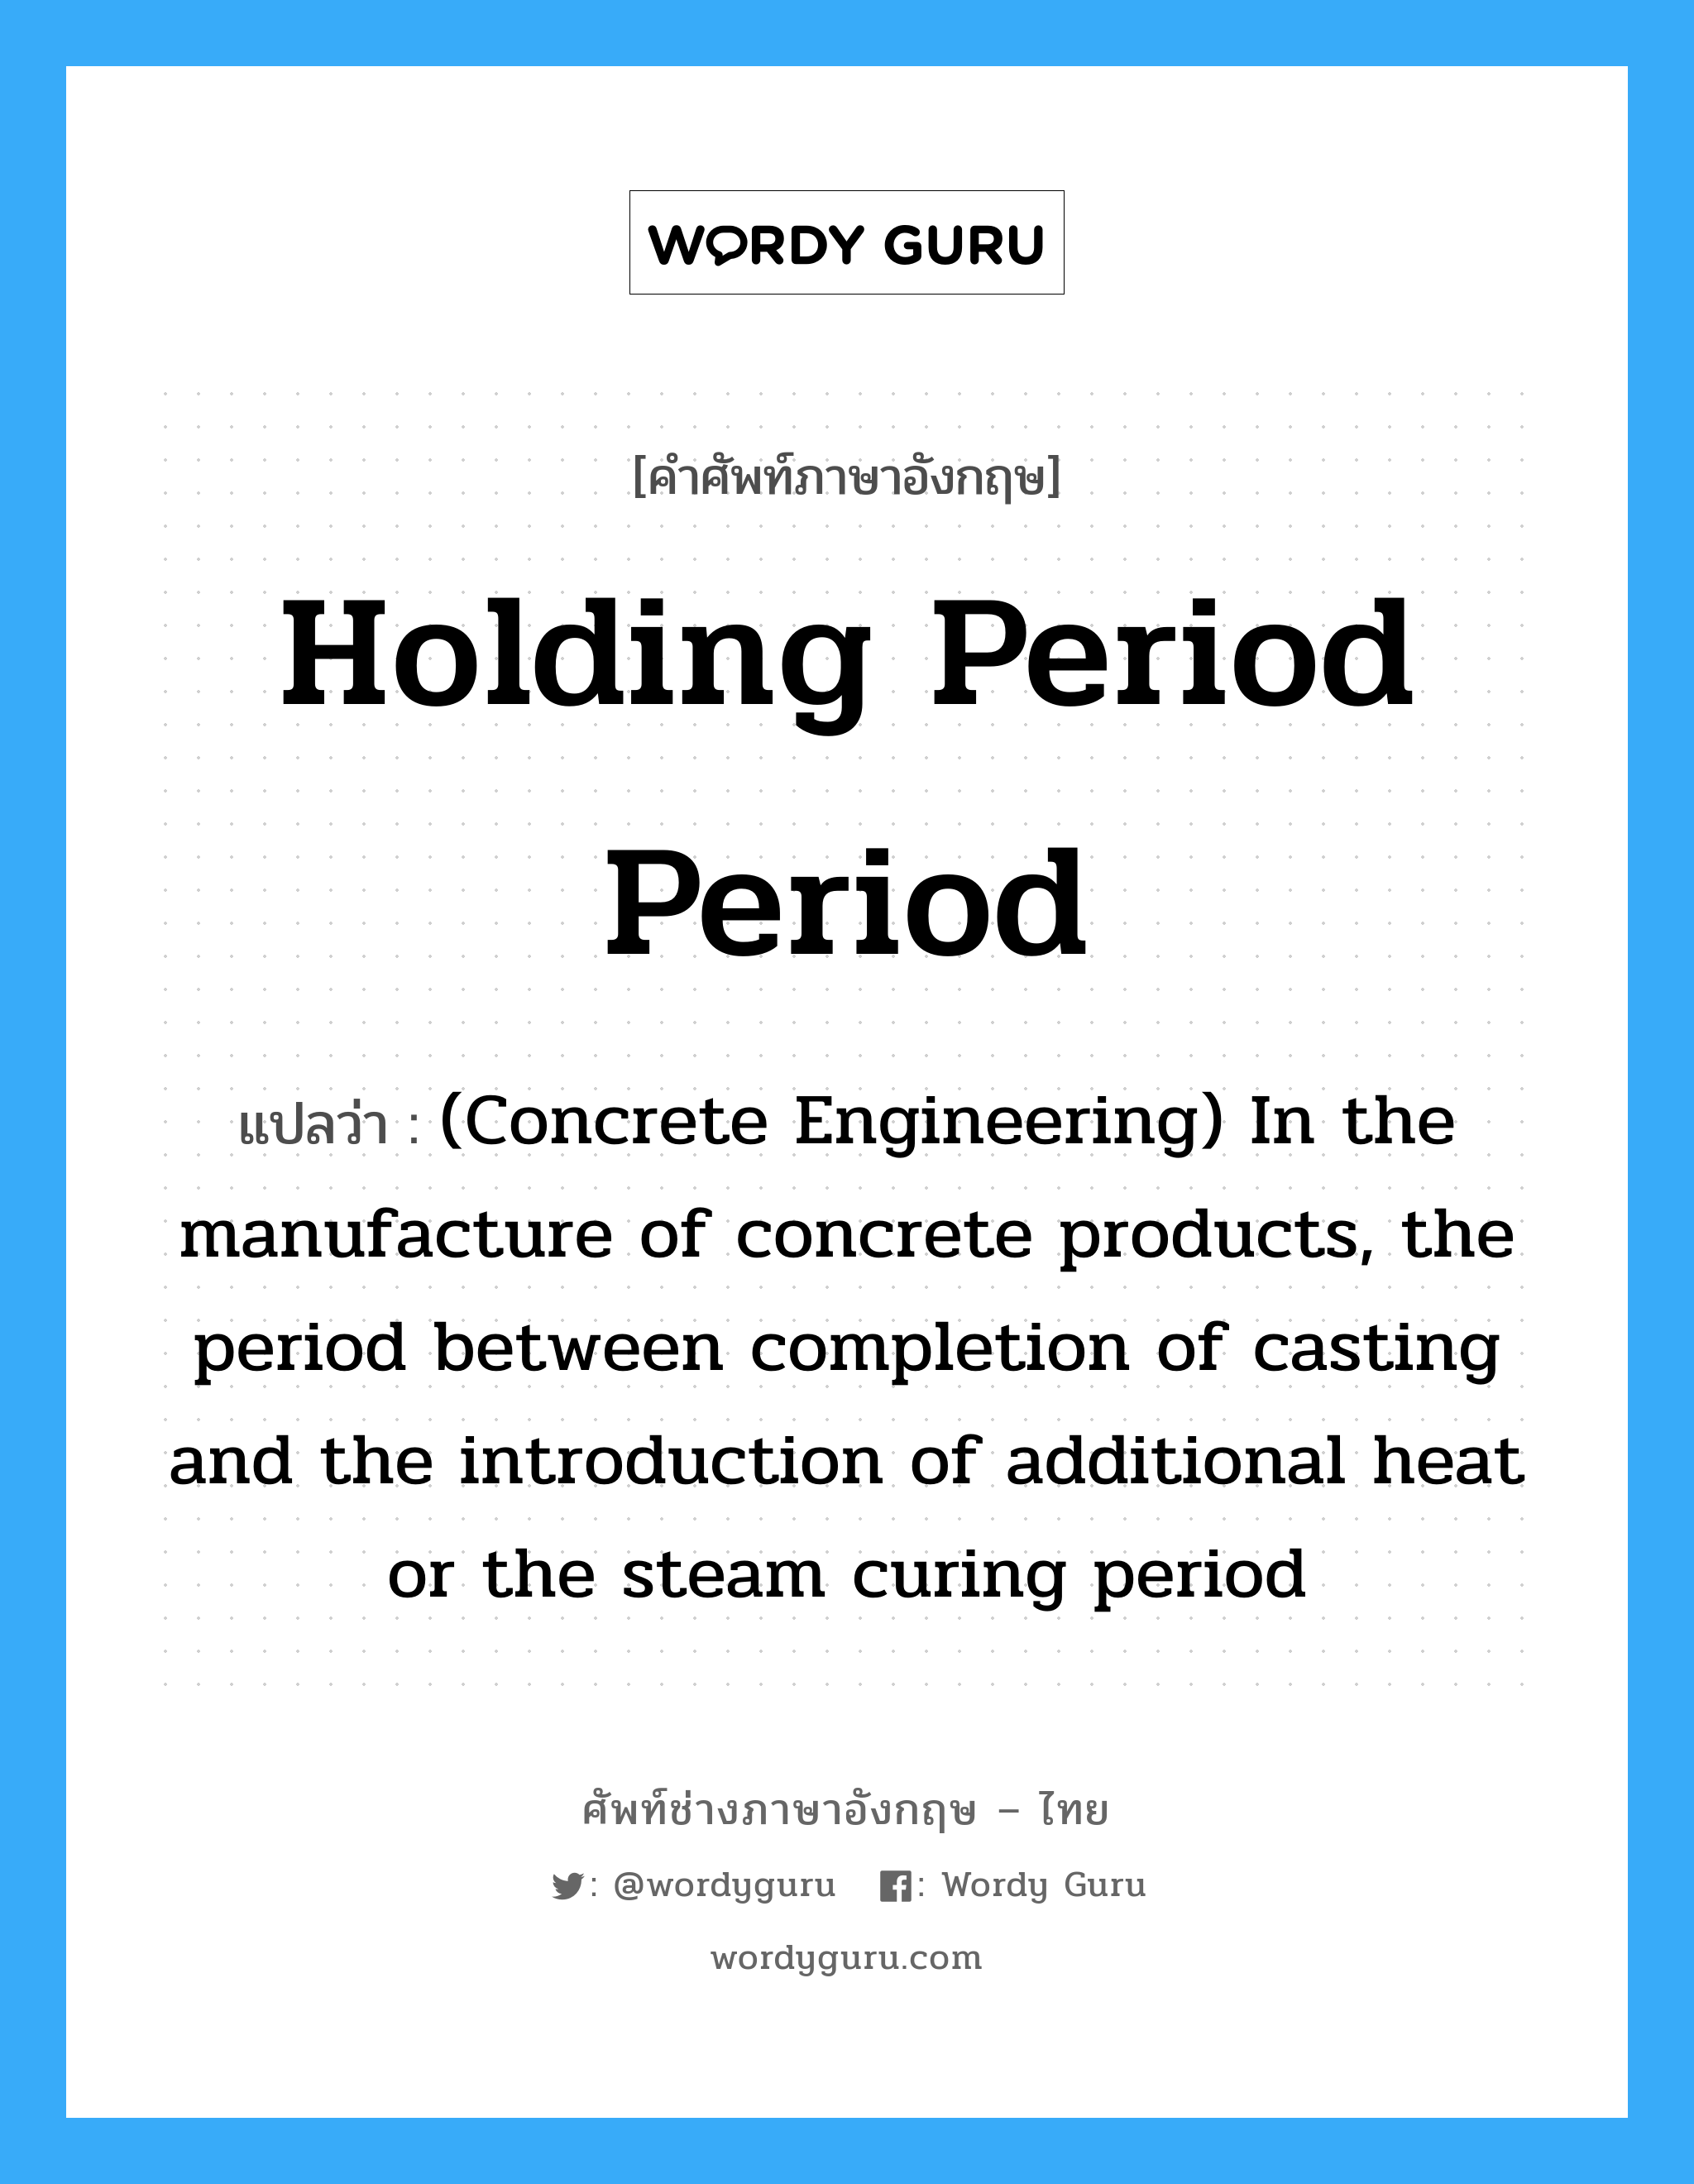 (Concrete Engineering) In the manufacture of concrete products, the period between completion of casting and the introduction of additional heat or the steam curing period ภาษาอังกฤษ?, คำศัพท์ช่างภาษาอังกฤษ - ไทย (Concrete Engineering) In the manufacture of concrete products, the period between completion of casting and the introduction of additional heat or the steam curing period คำศัพท์ภาษาอังกฤษ (Concrete Engineering) In the manufacture of concrete products, the period between completion of casting and the introduction of additional heat or the steam curing period แปลว่า Holding Period Period